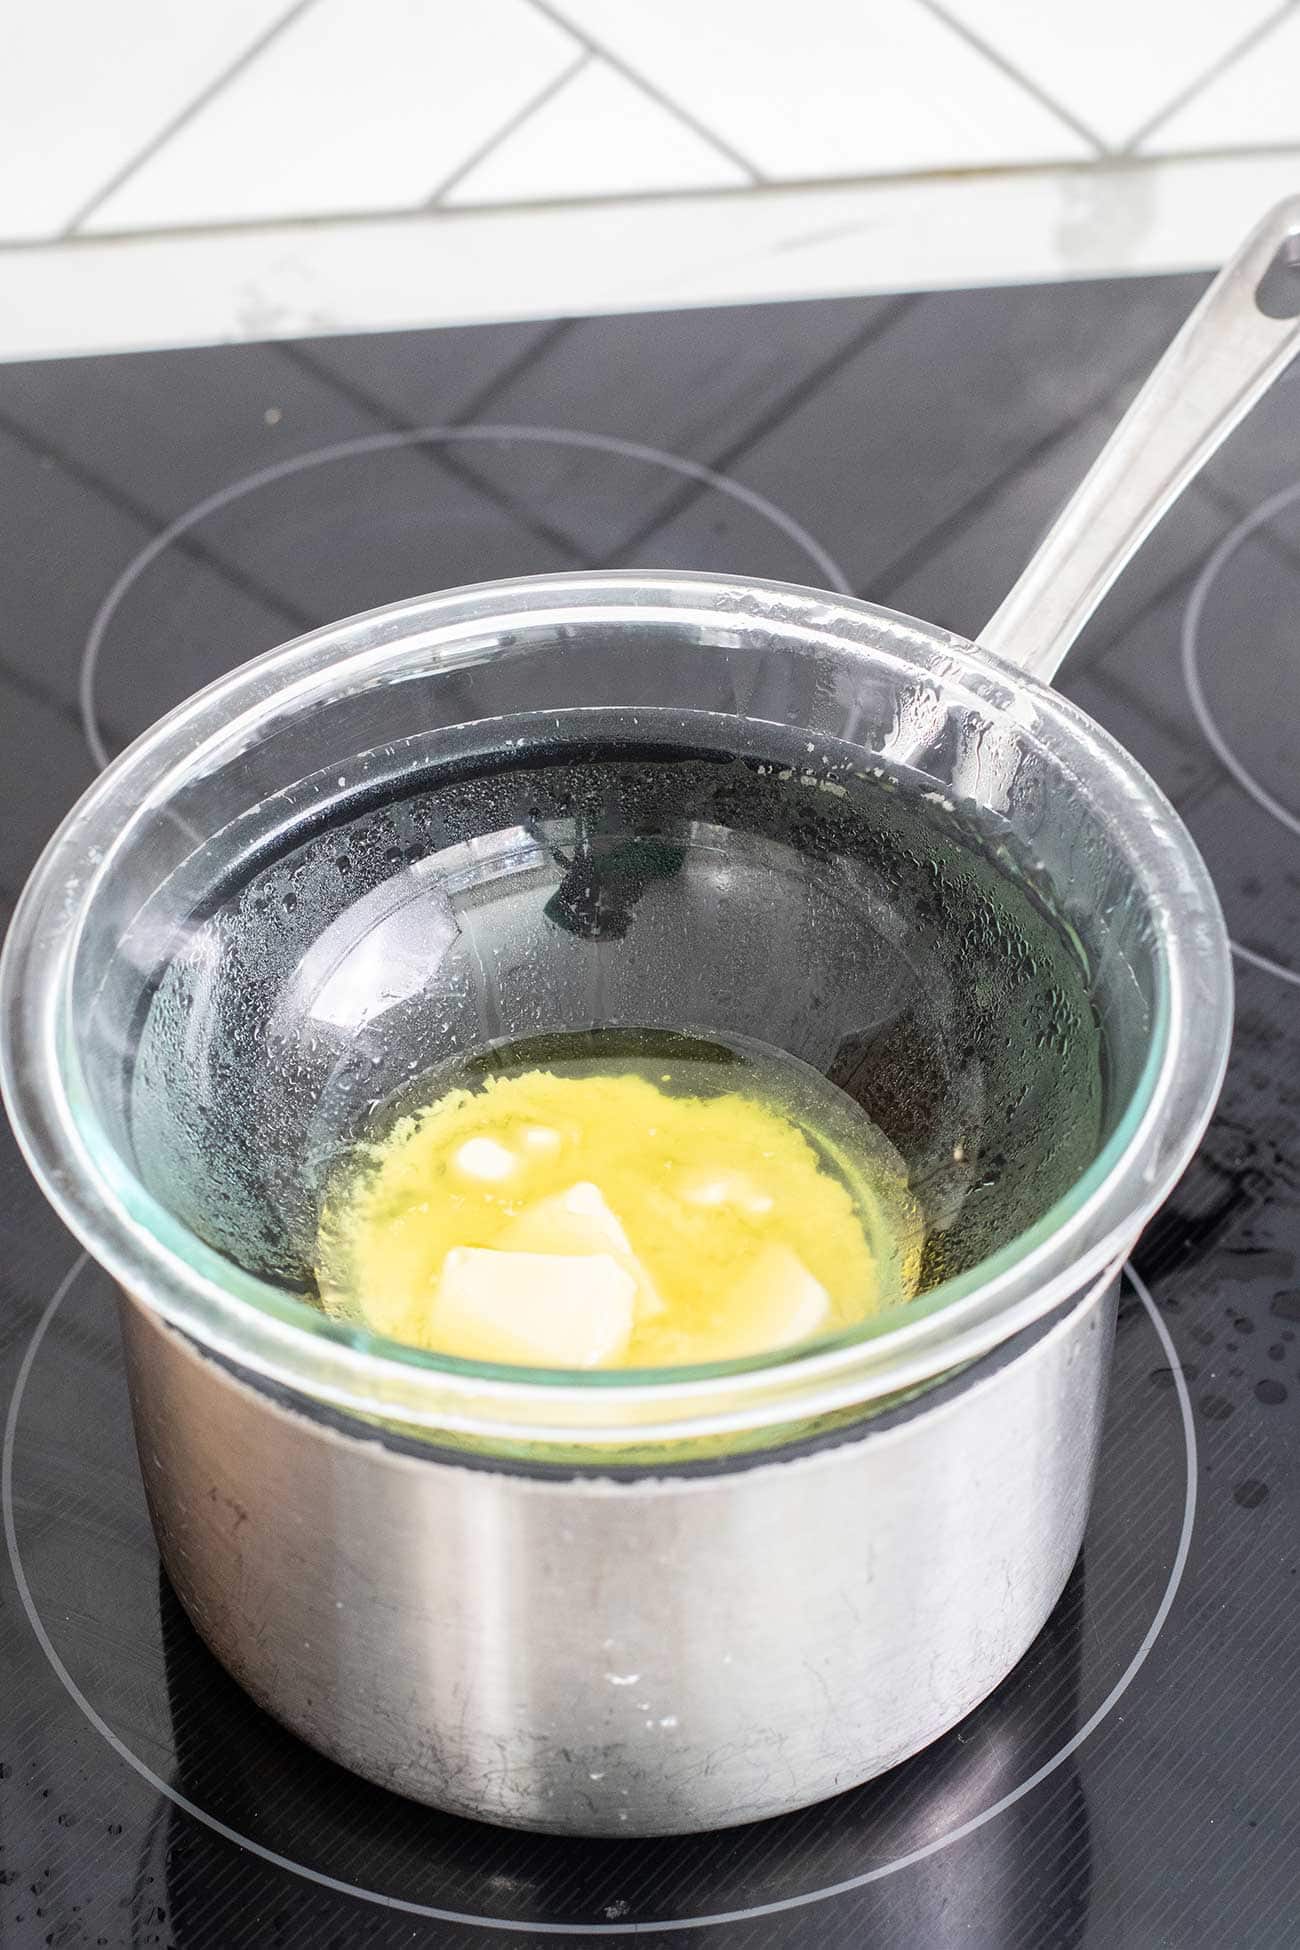 Butter melting in a double boiler.